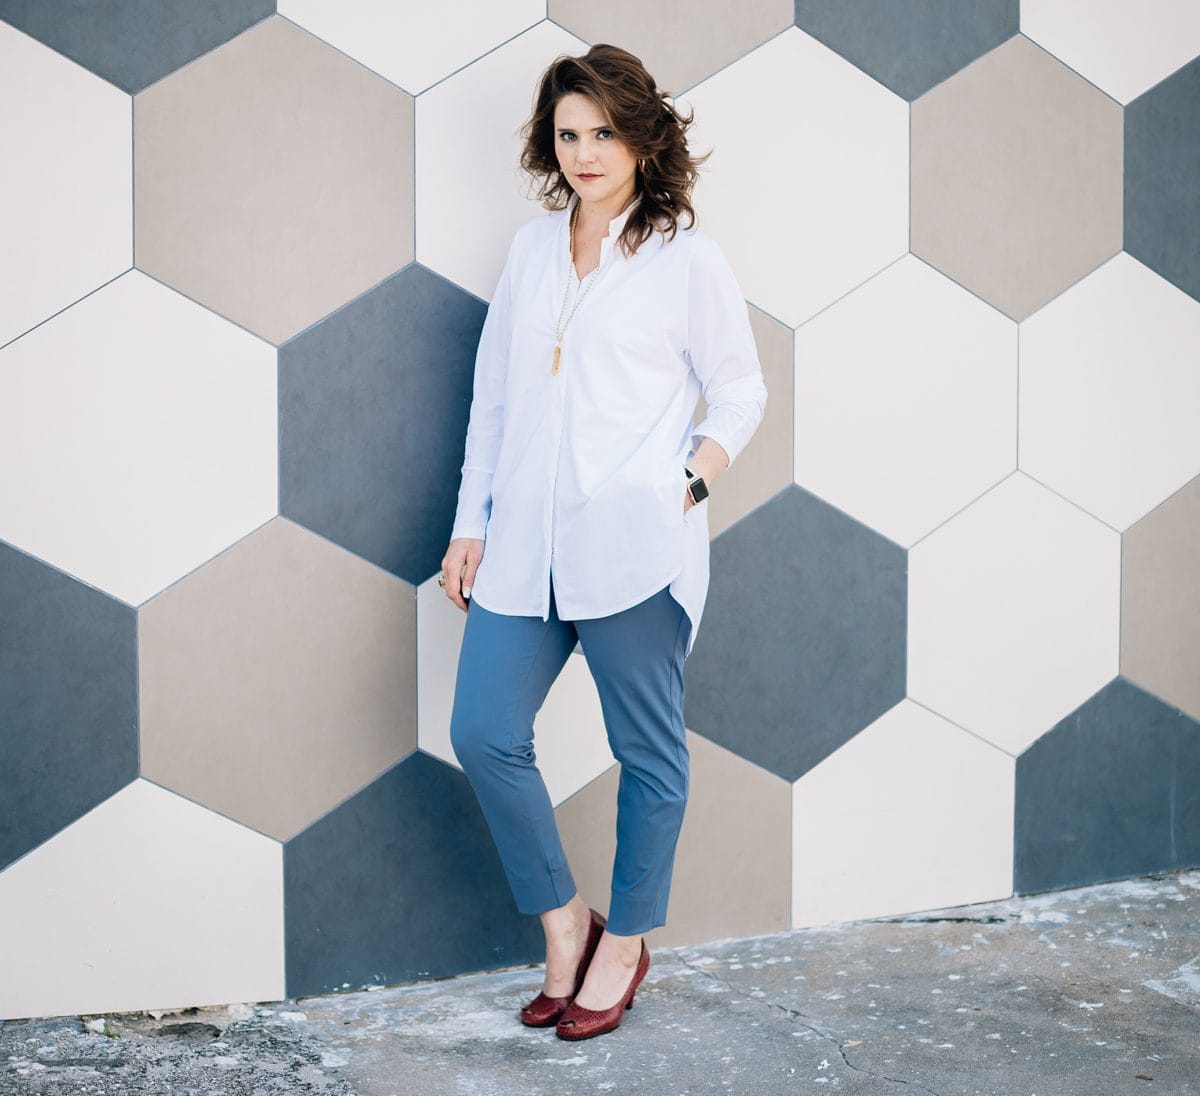 Sculpt Pull-On Jeggings - Empire Wash  Transition outfits, Spring  transition outfit, Most comfortable jeans